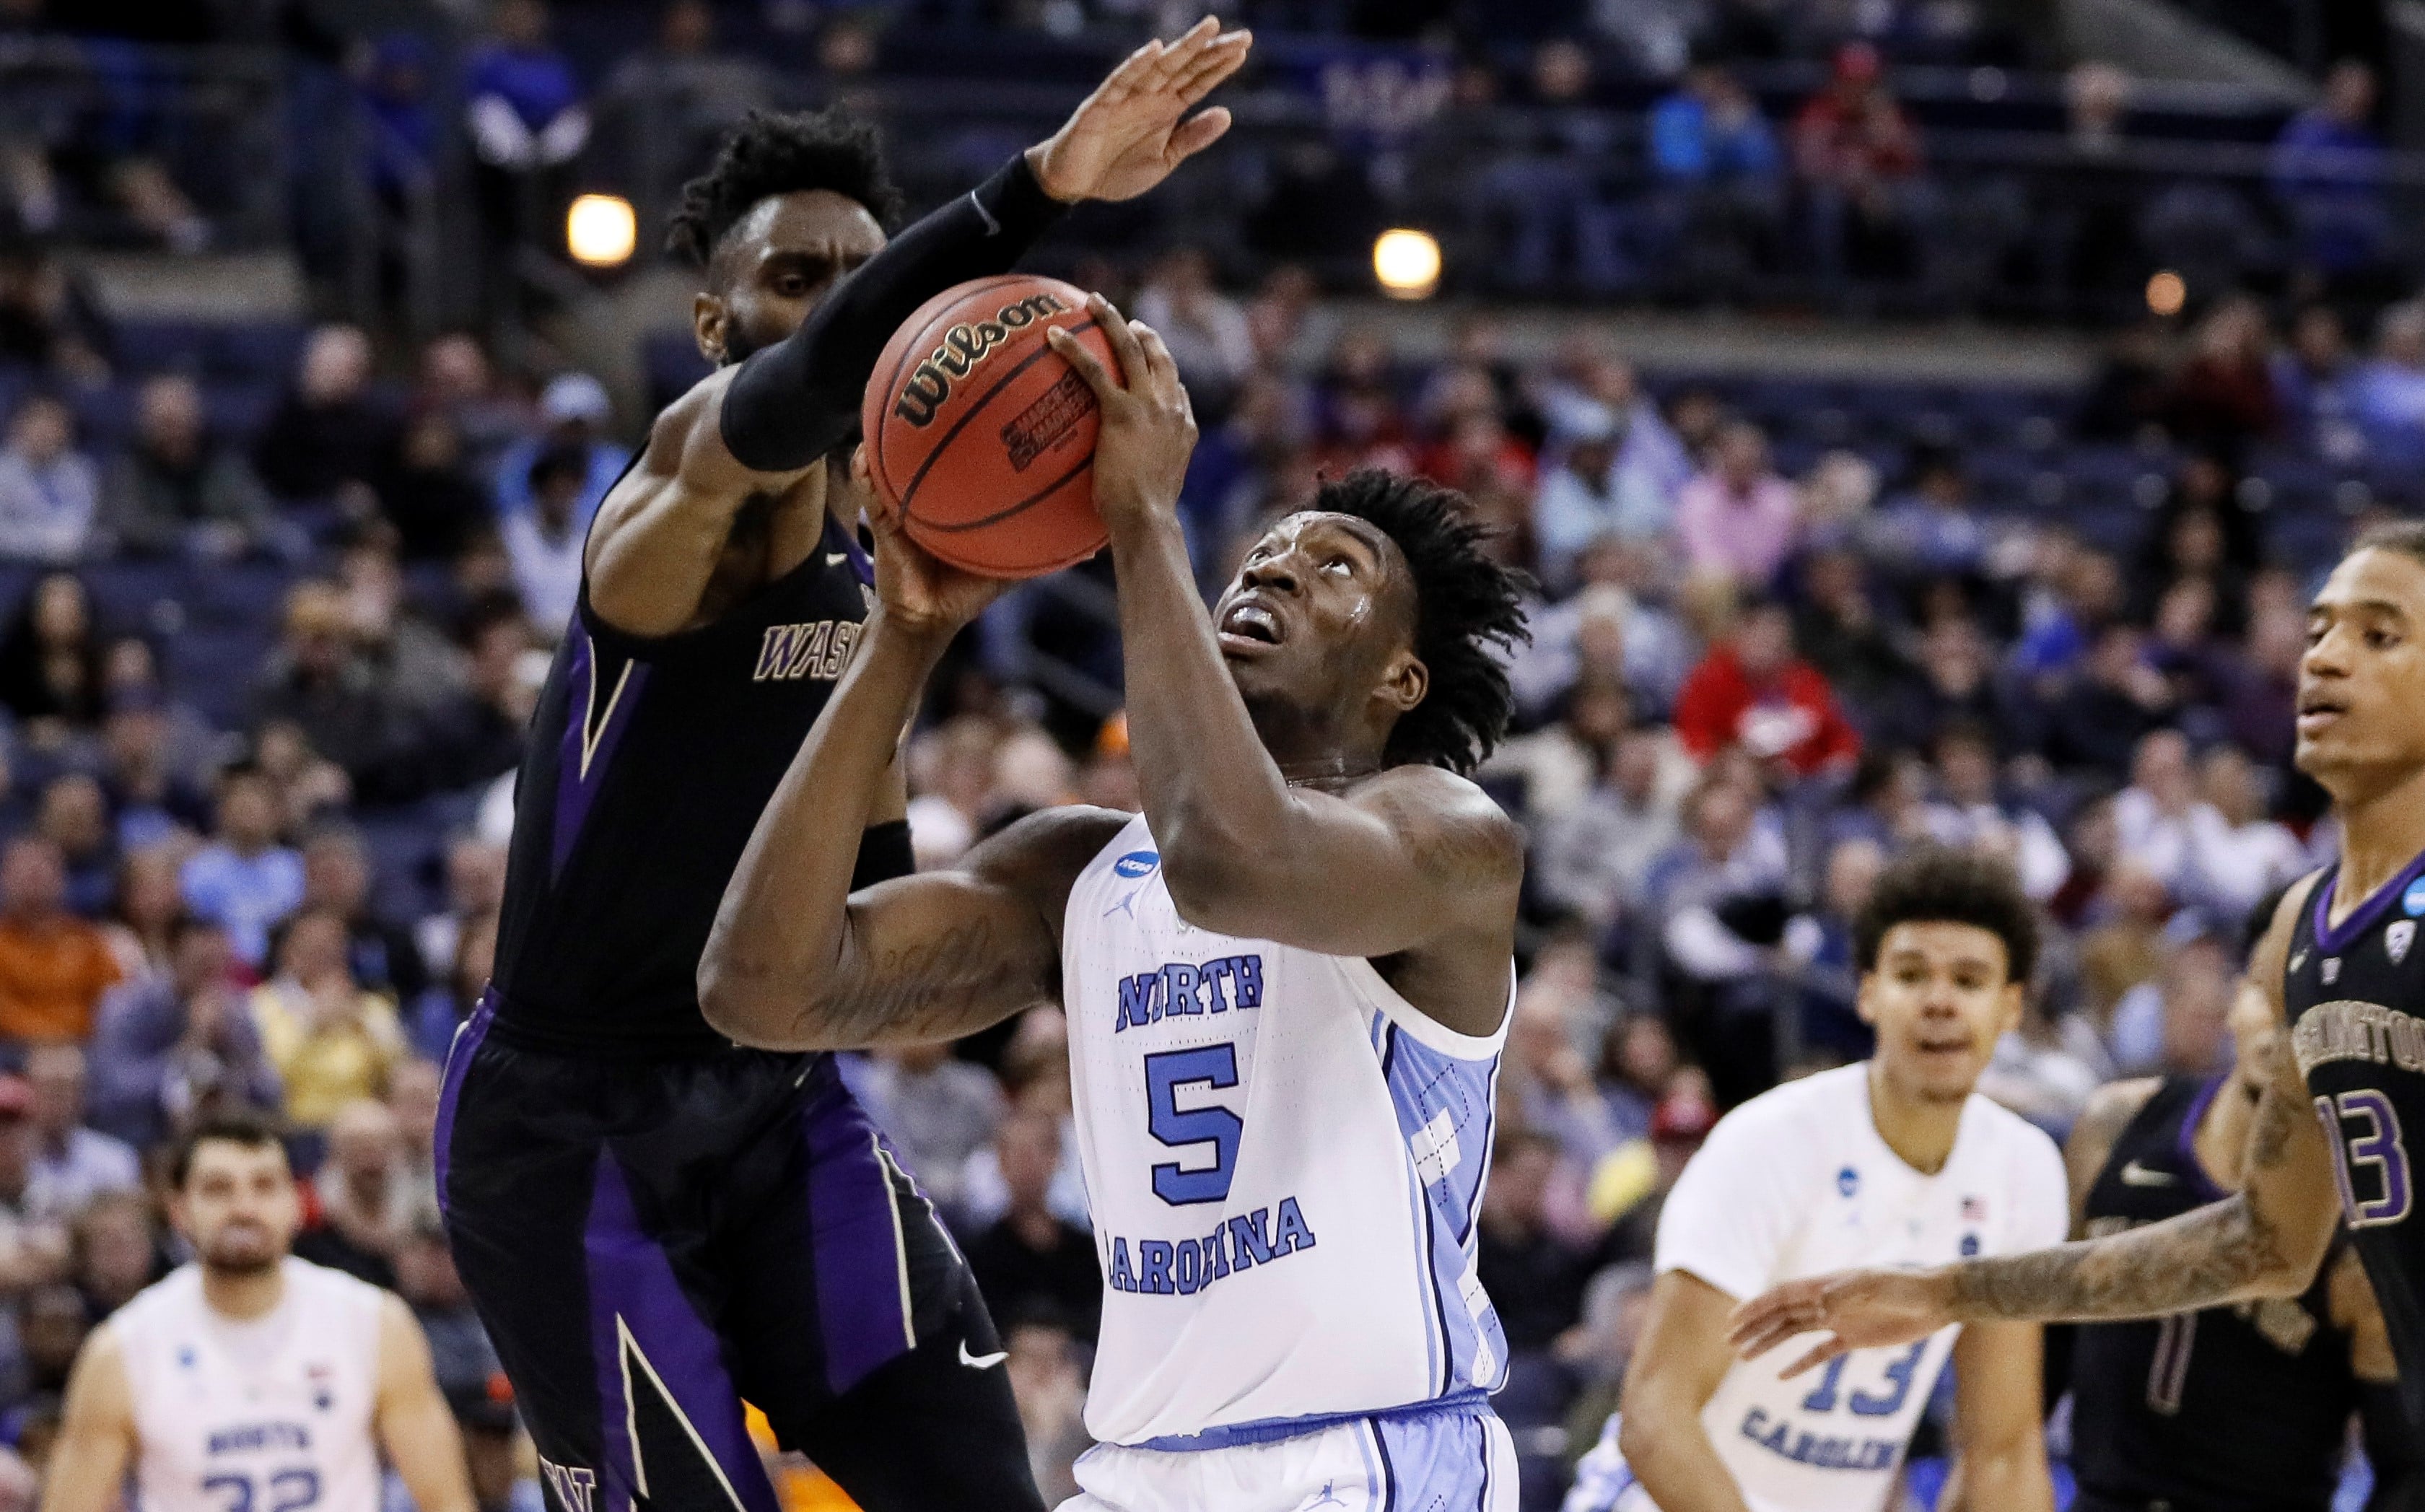 UNC's Nassir Little has fever, questionable for Sweet 16 matchup